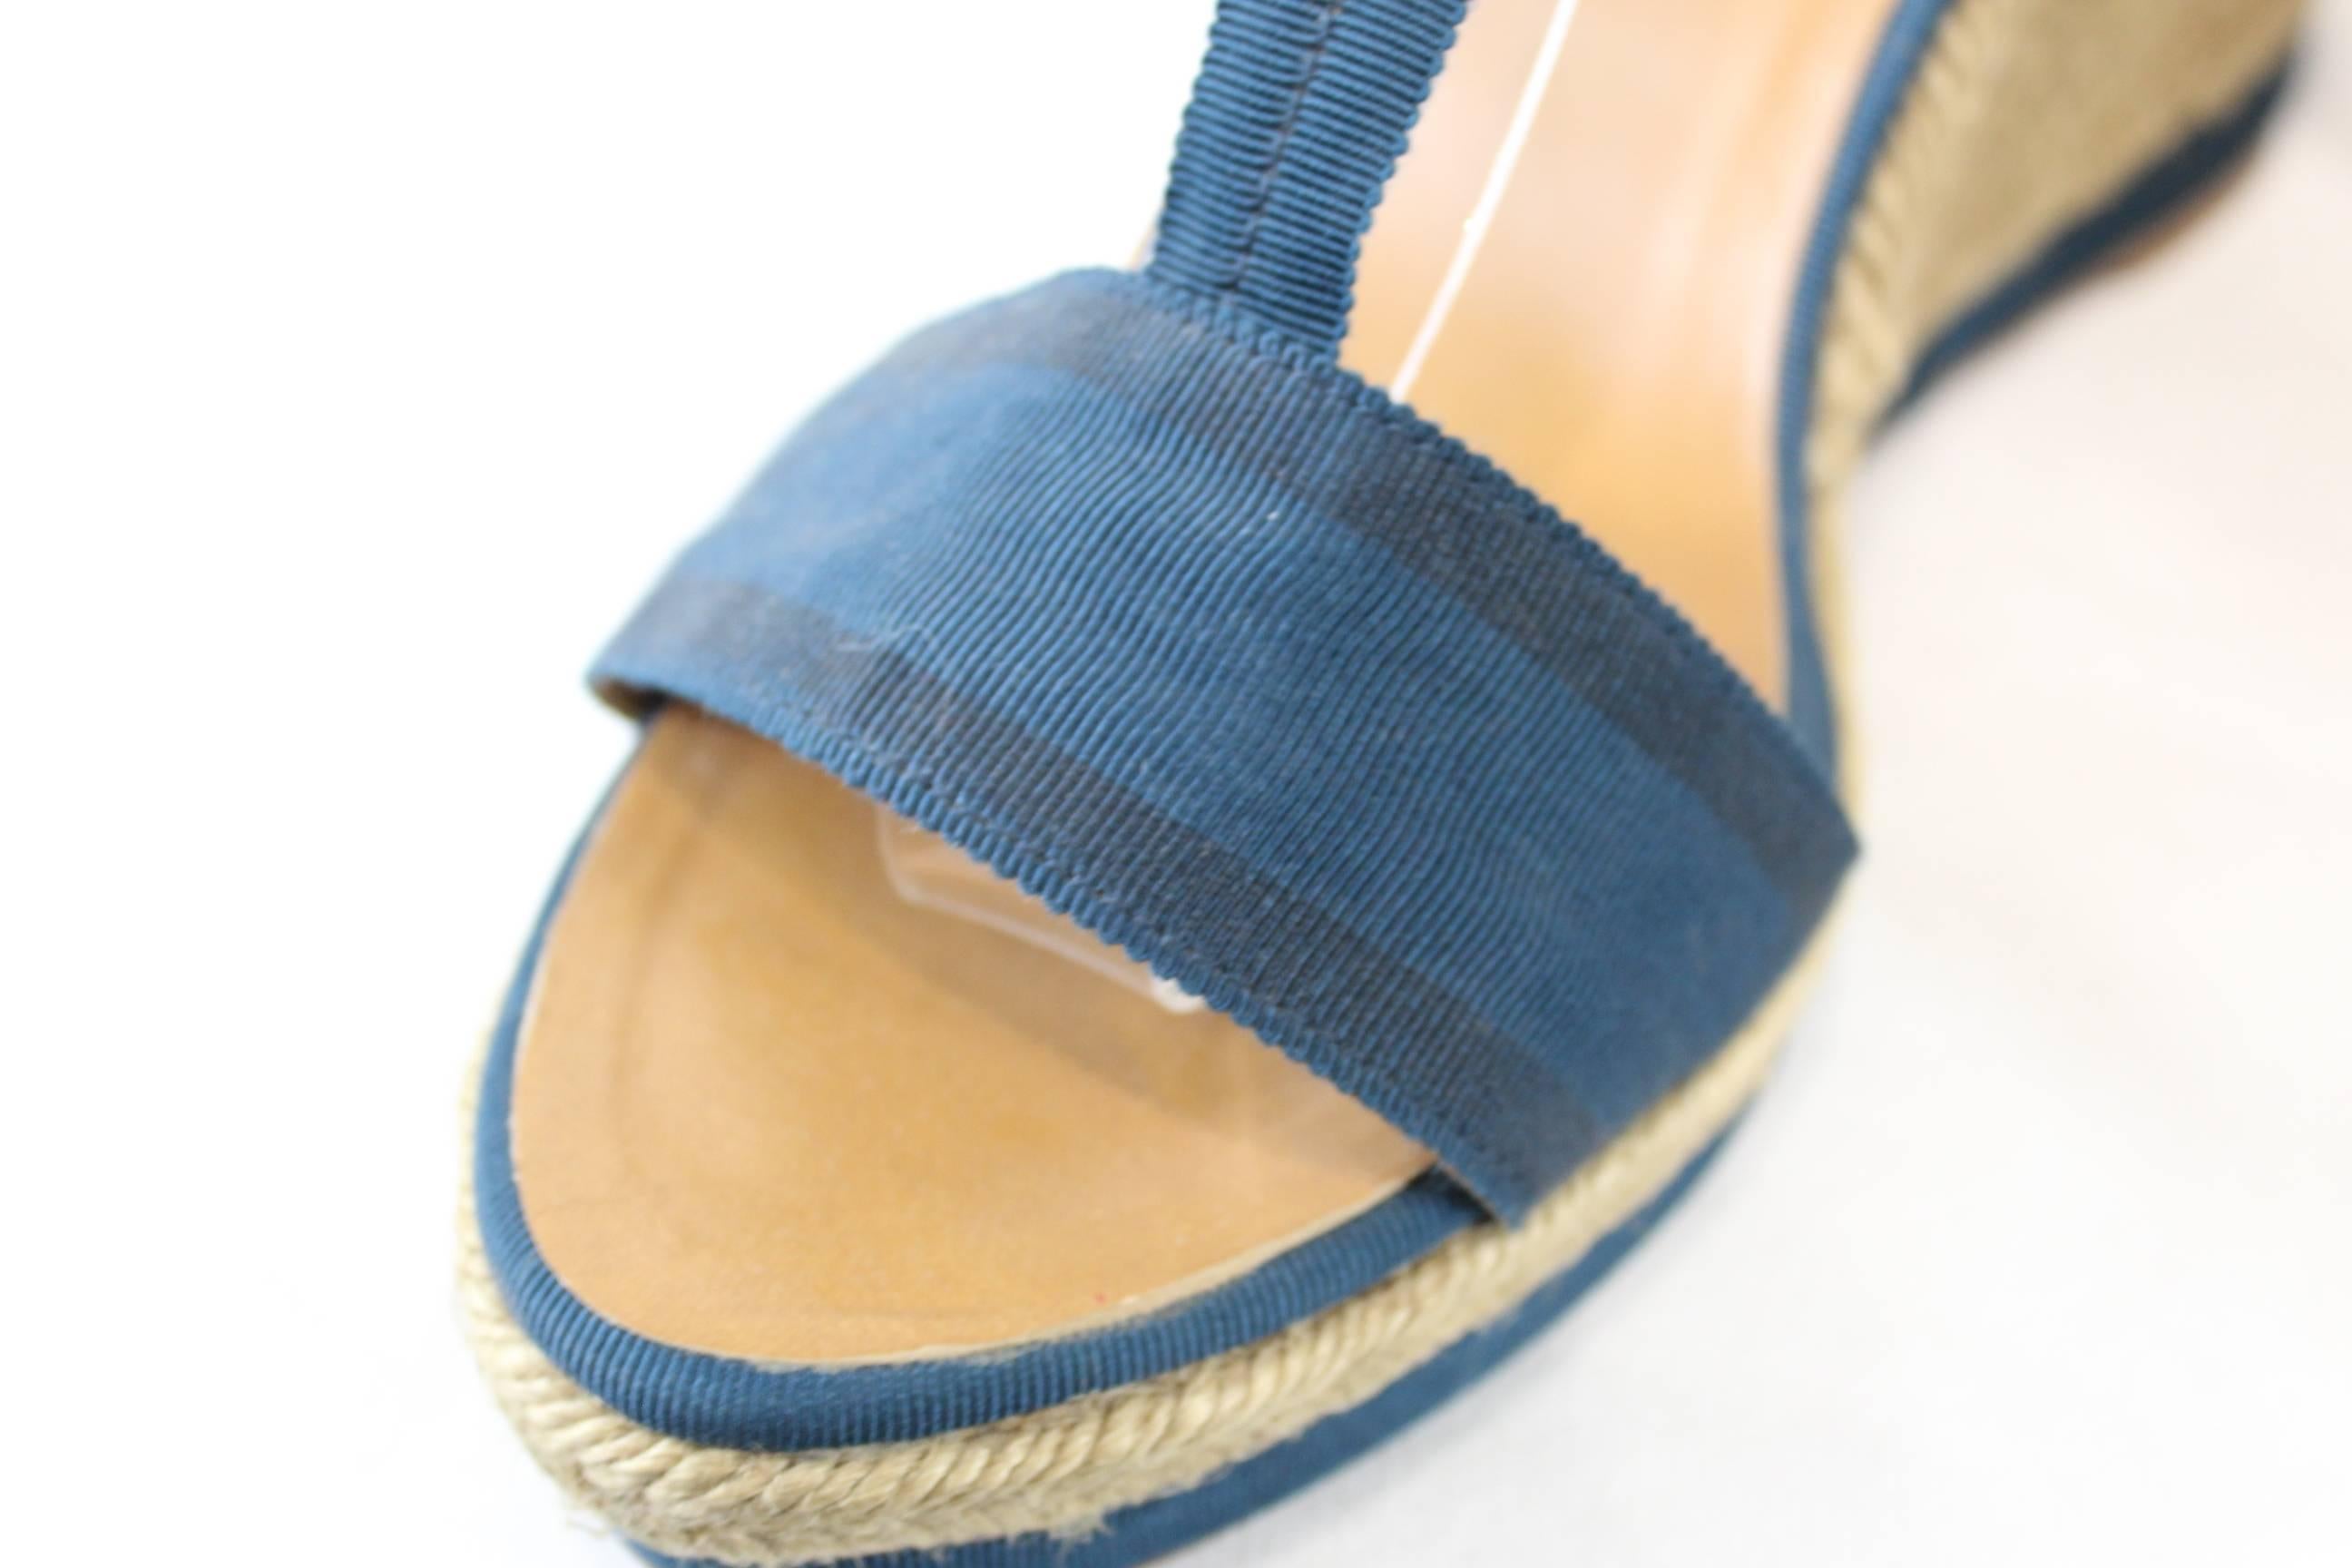 Gray Nice Lanvin Espadrilles in Canvas and Cord. Size US 9 (EU 41) For Sale